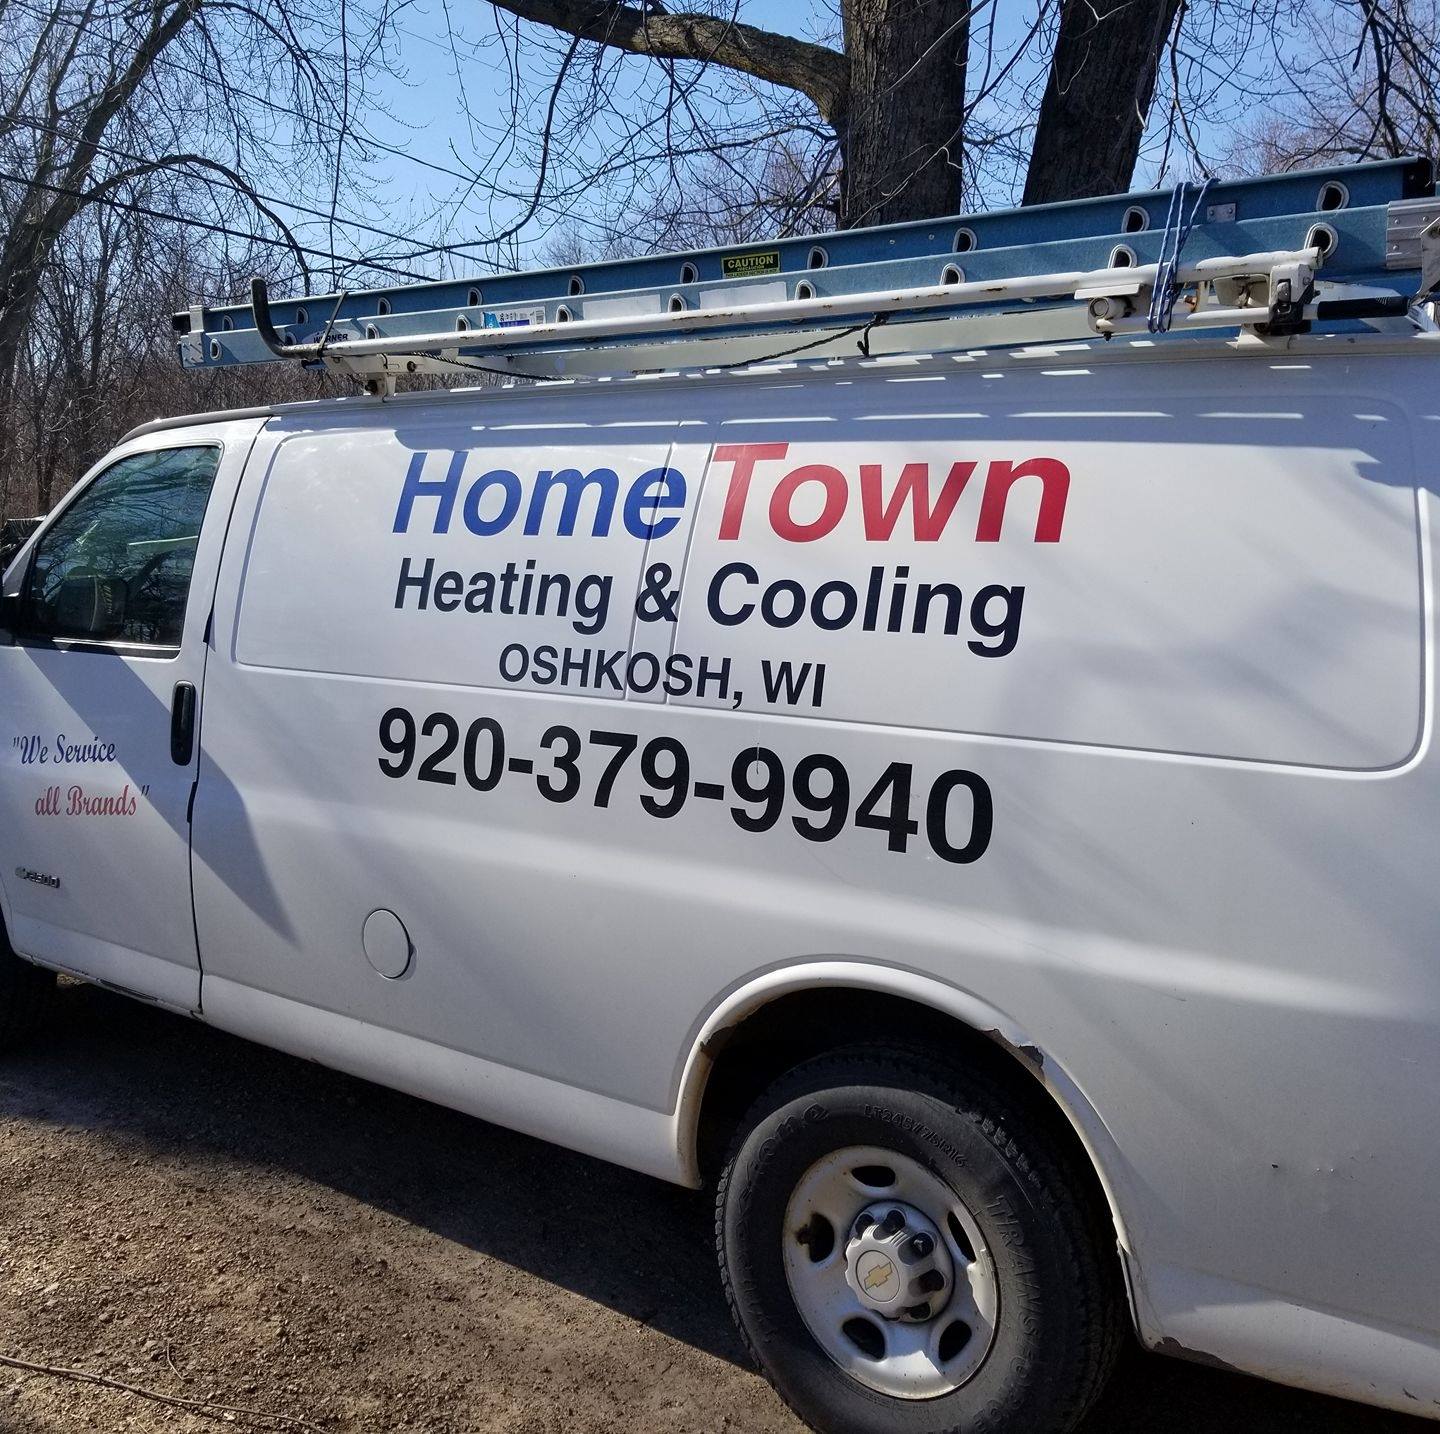 Home Town Heating & Cooling